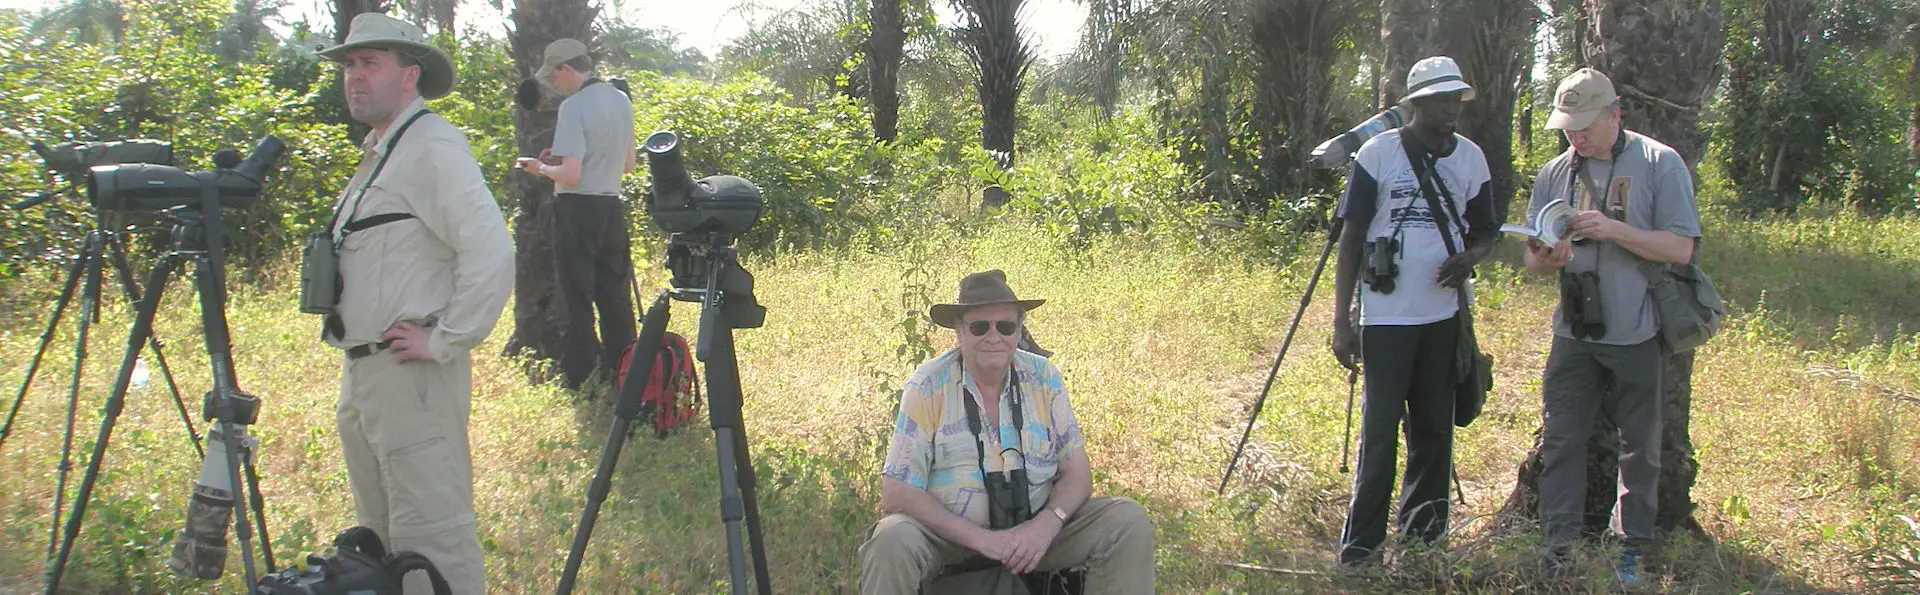 Birdwatching in The Gambia